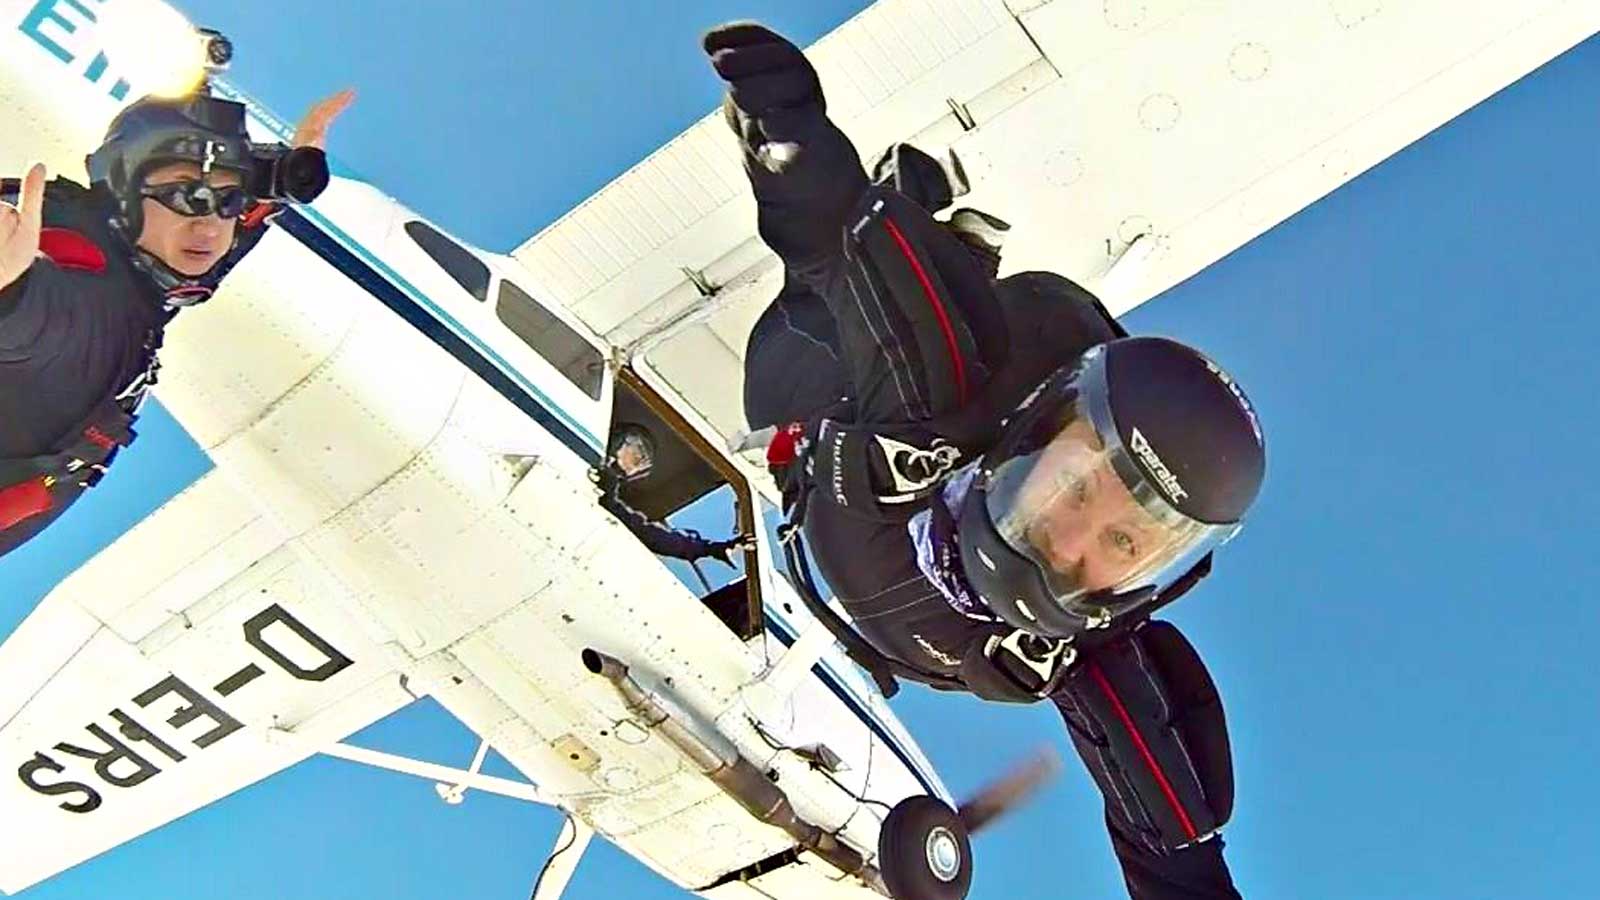 Jacky skydiving with friends from a Cessna 180 in 2016